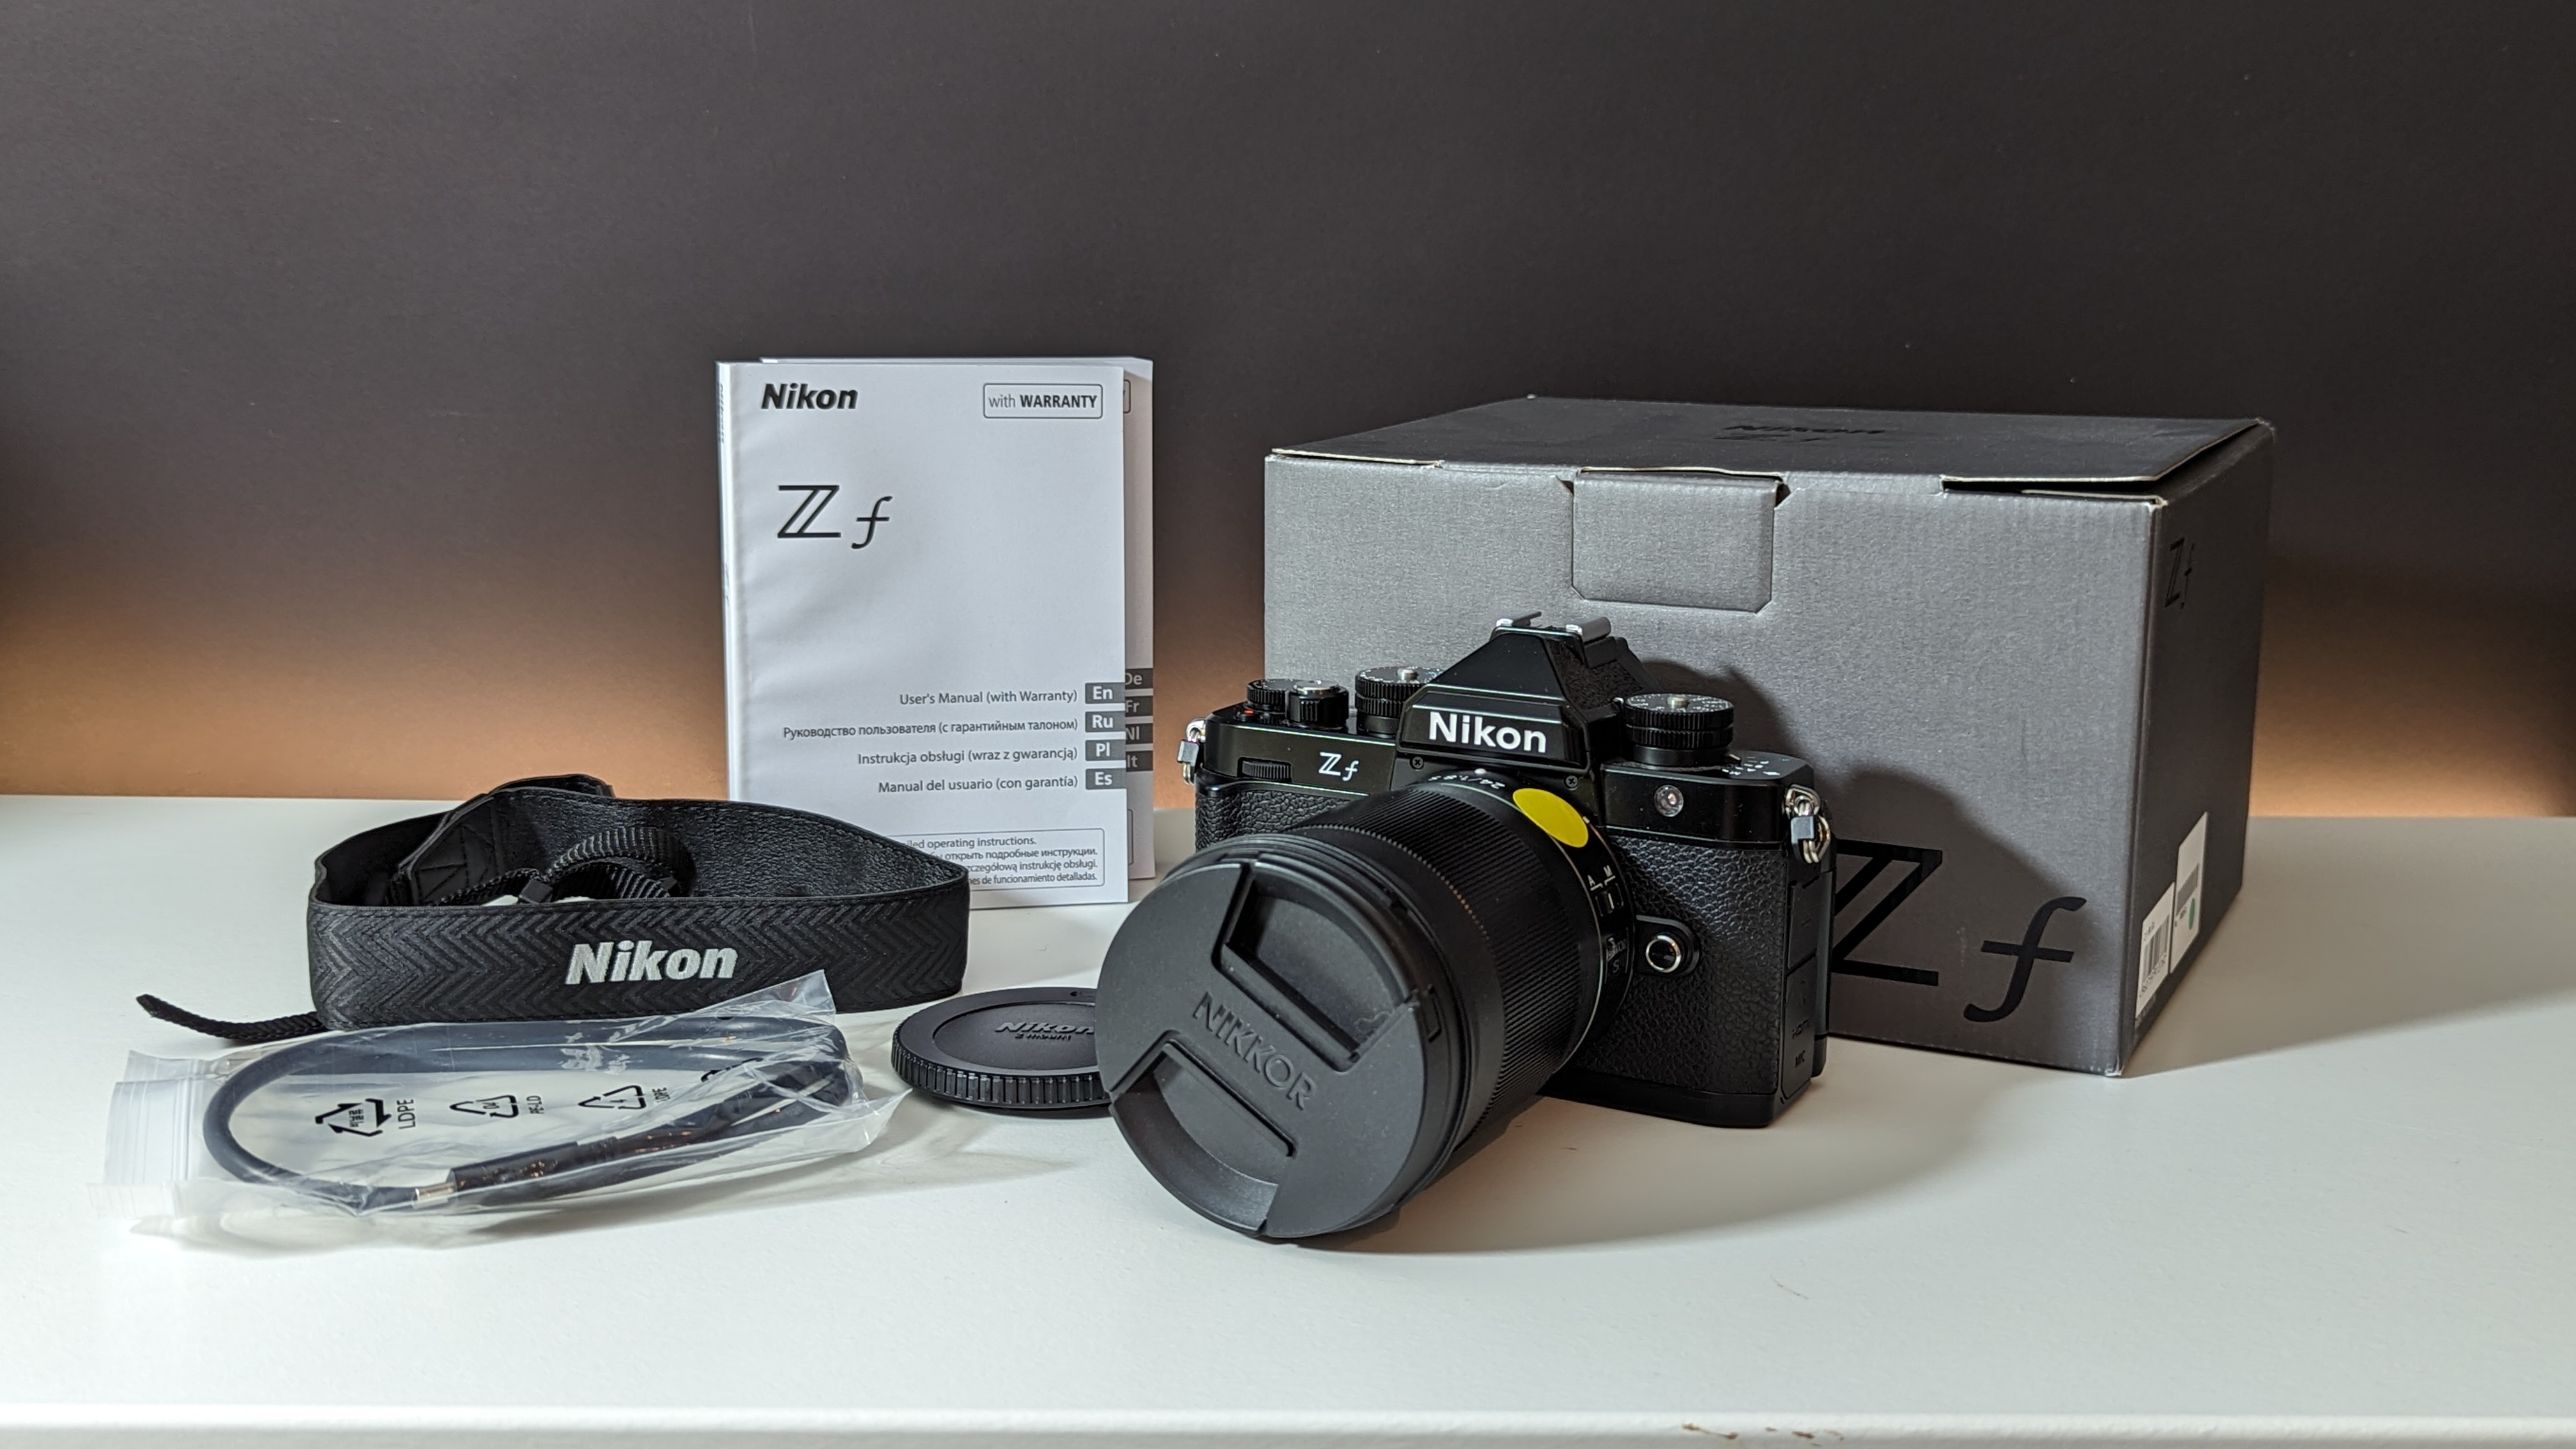 Nikon Zf and box and content on white table